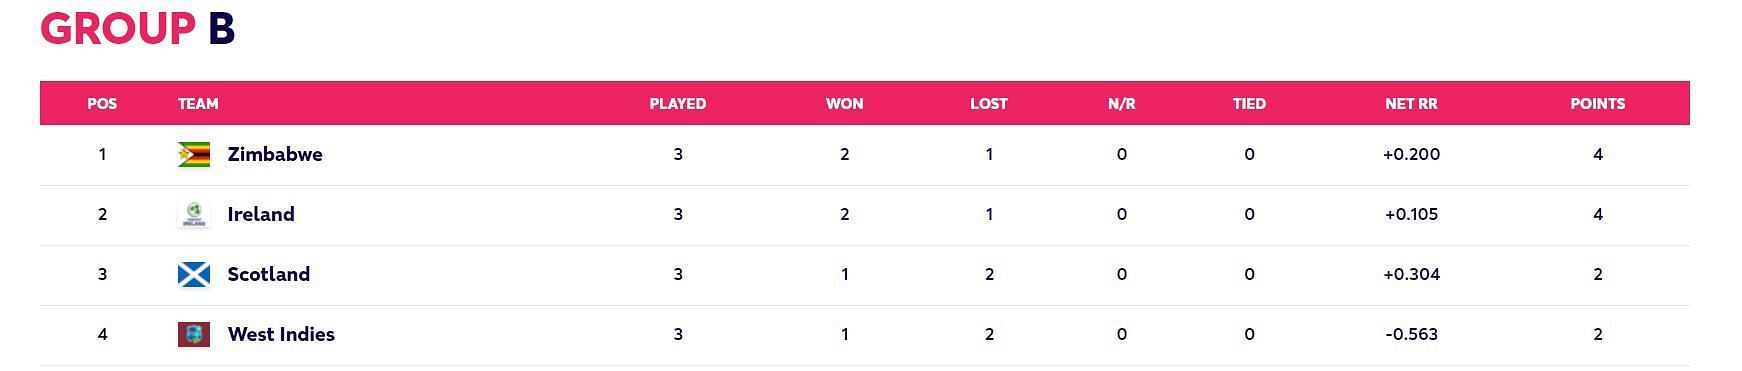 Updated Points Table after Match 12 (Image Courtesy: www.t20worldcup.com)